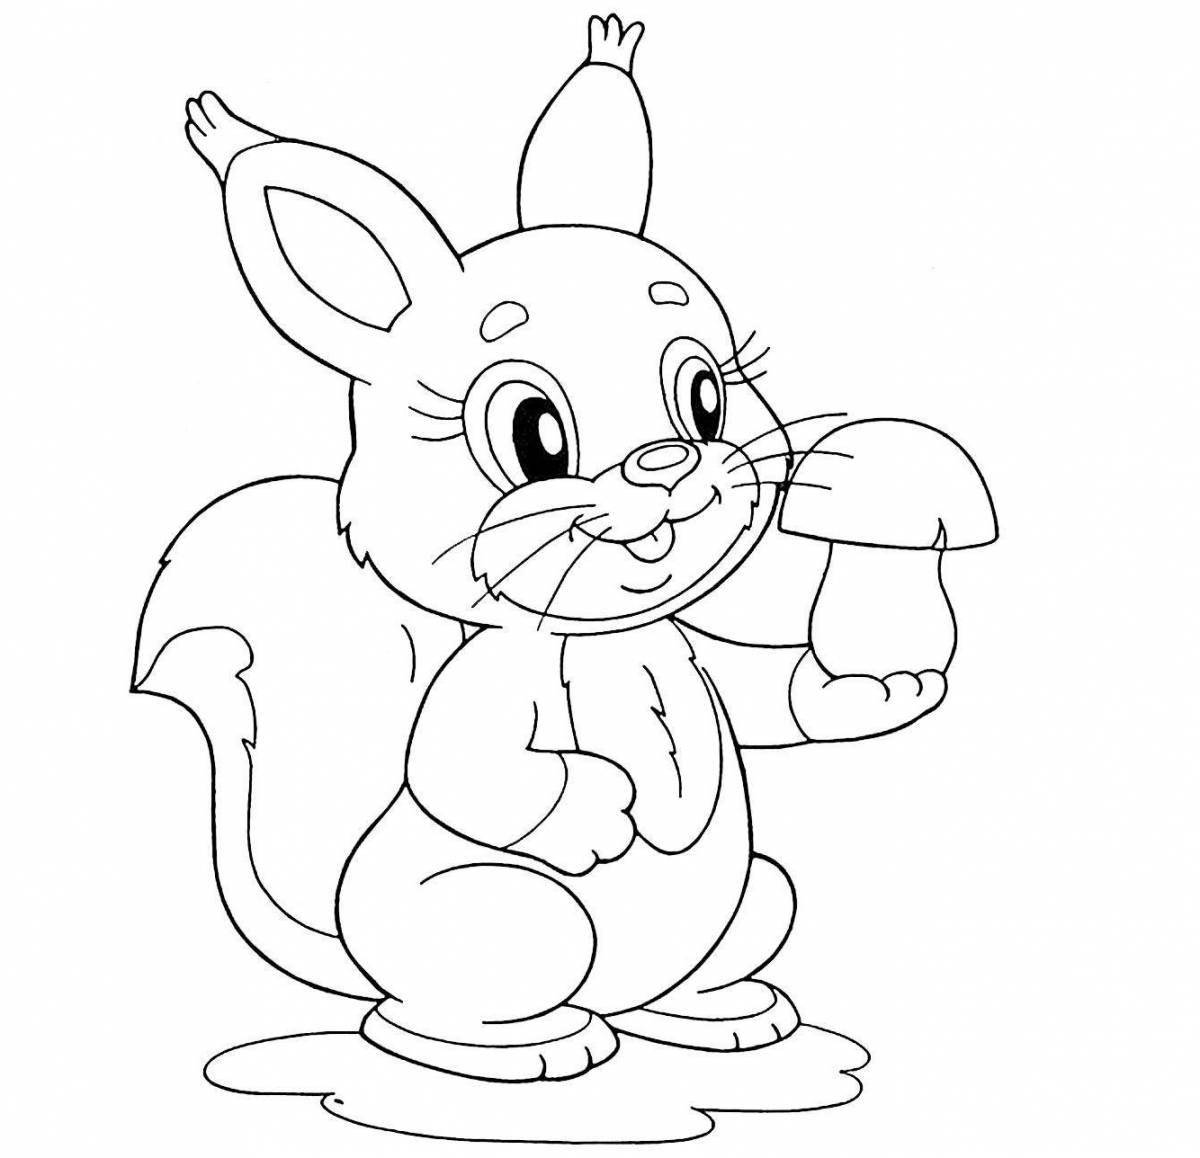 Fancy squirrel coloring book for 3-4 year olds